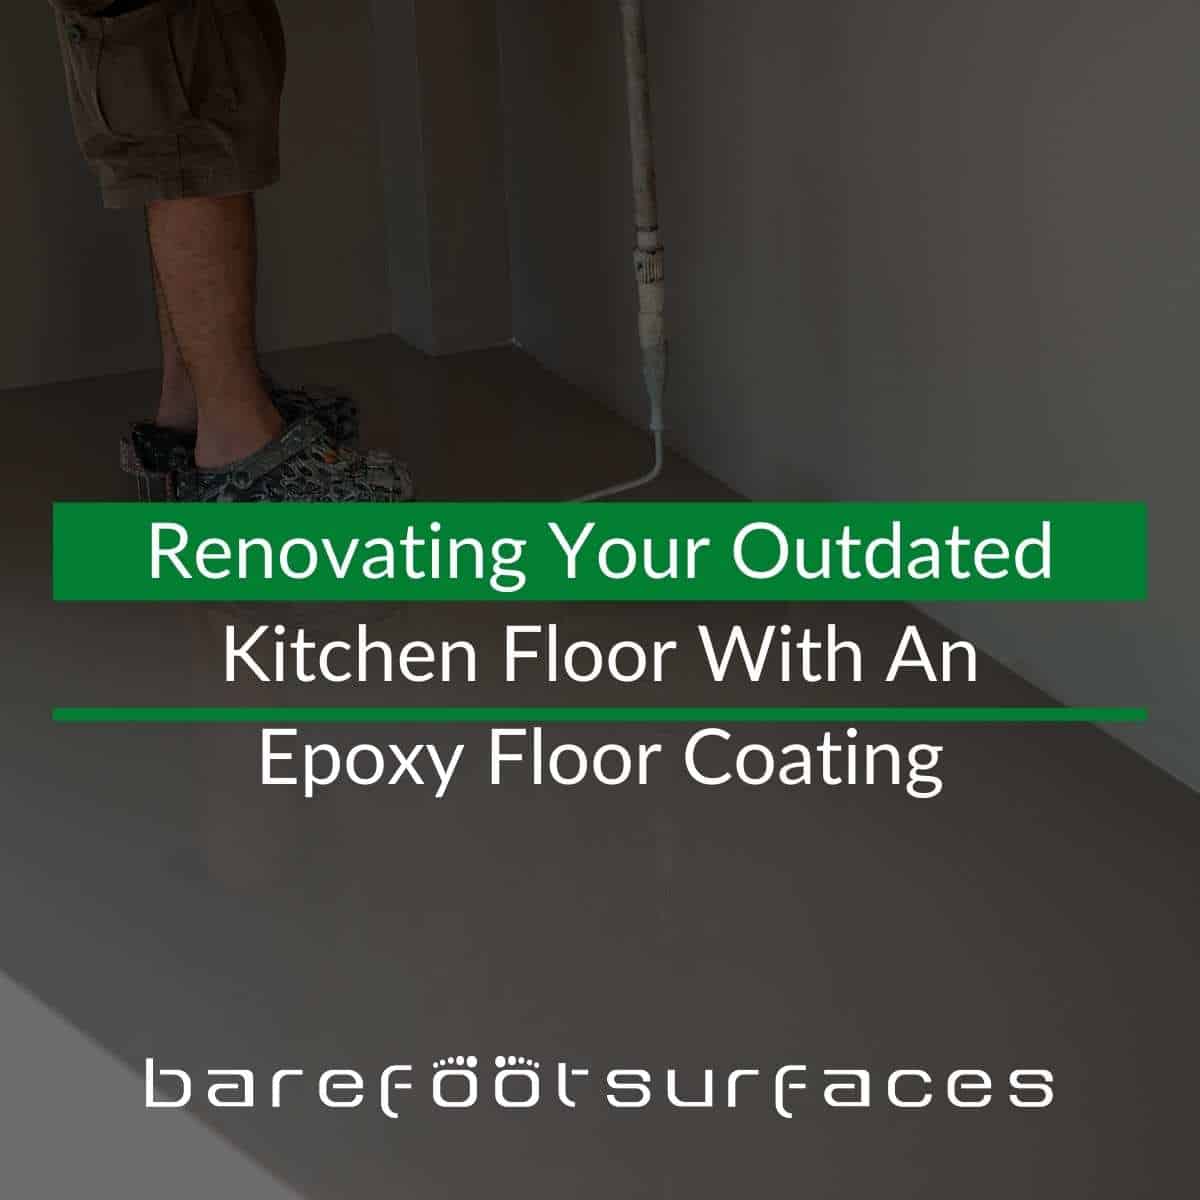 Renovating Your Outdated Kitchen Floor with an Epoxy Floor Coating